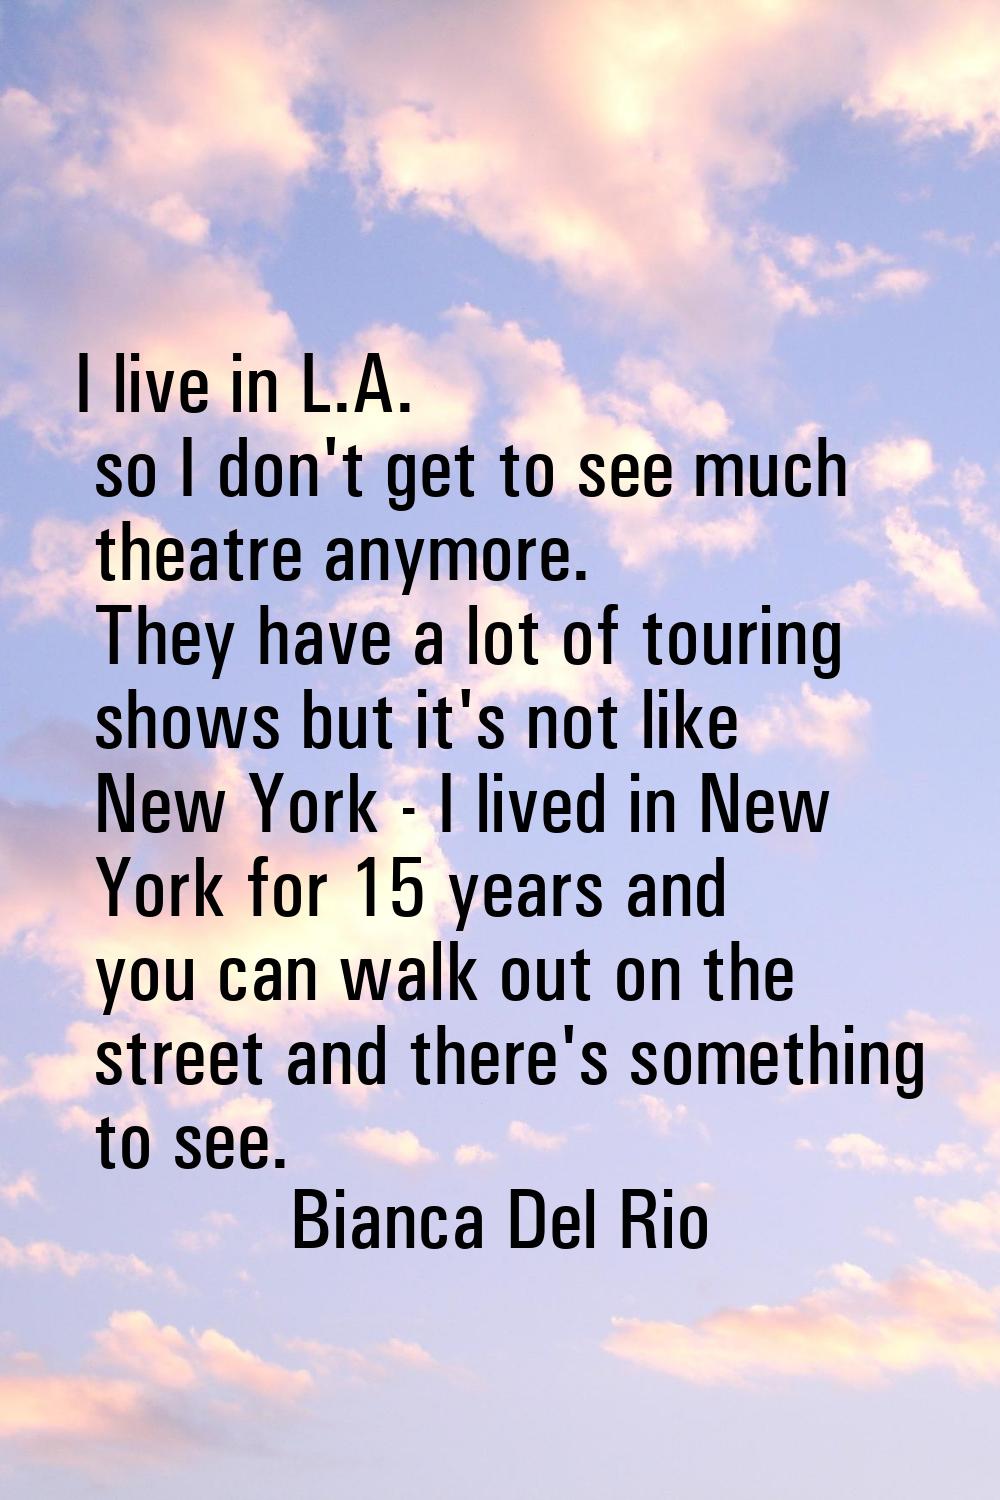 I live in L.A. so I don't get to see much theatre anymore. They have a lot of touring shows but it'